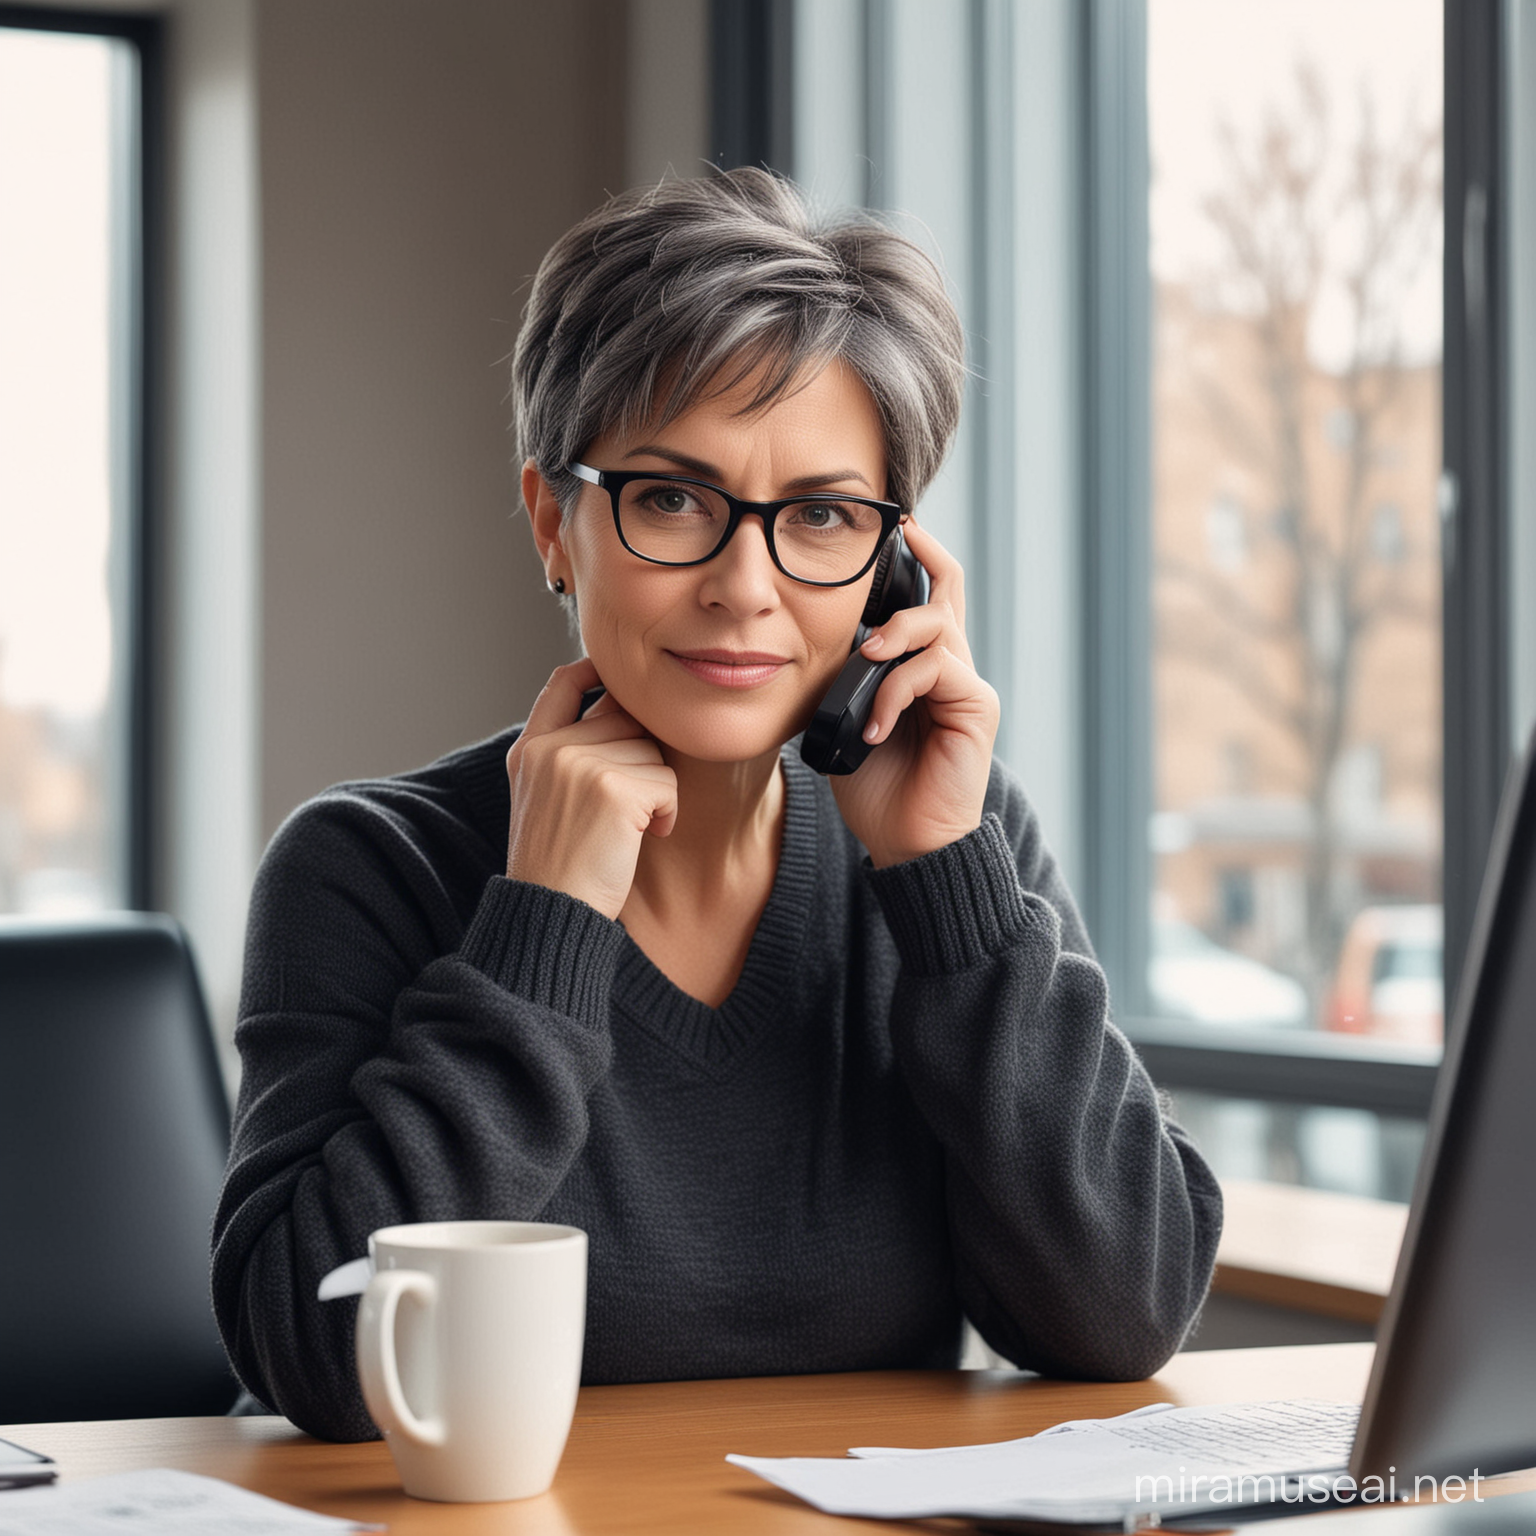 office worker from HR department, in her early 50s, slightly dark grey short hair, glasses, sitting at office desk, talking through phone and holding coffee mug in other hand, wearing dark sweater, office window in background